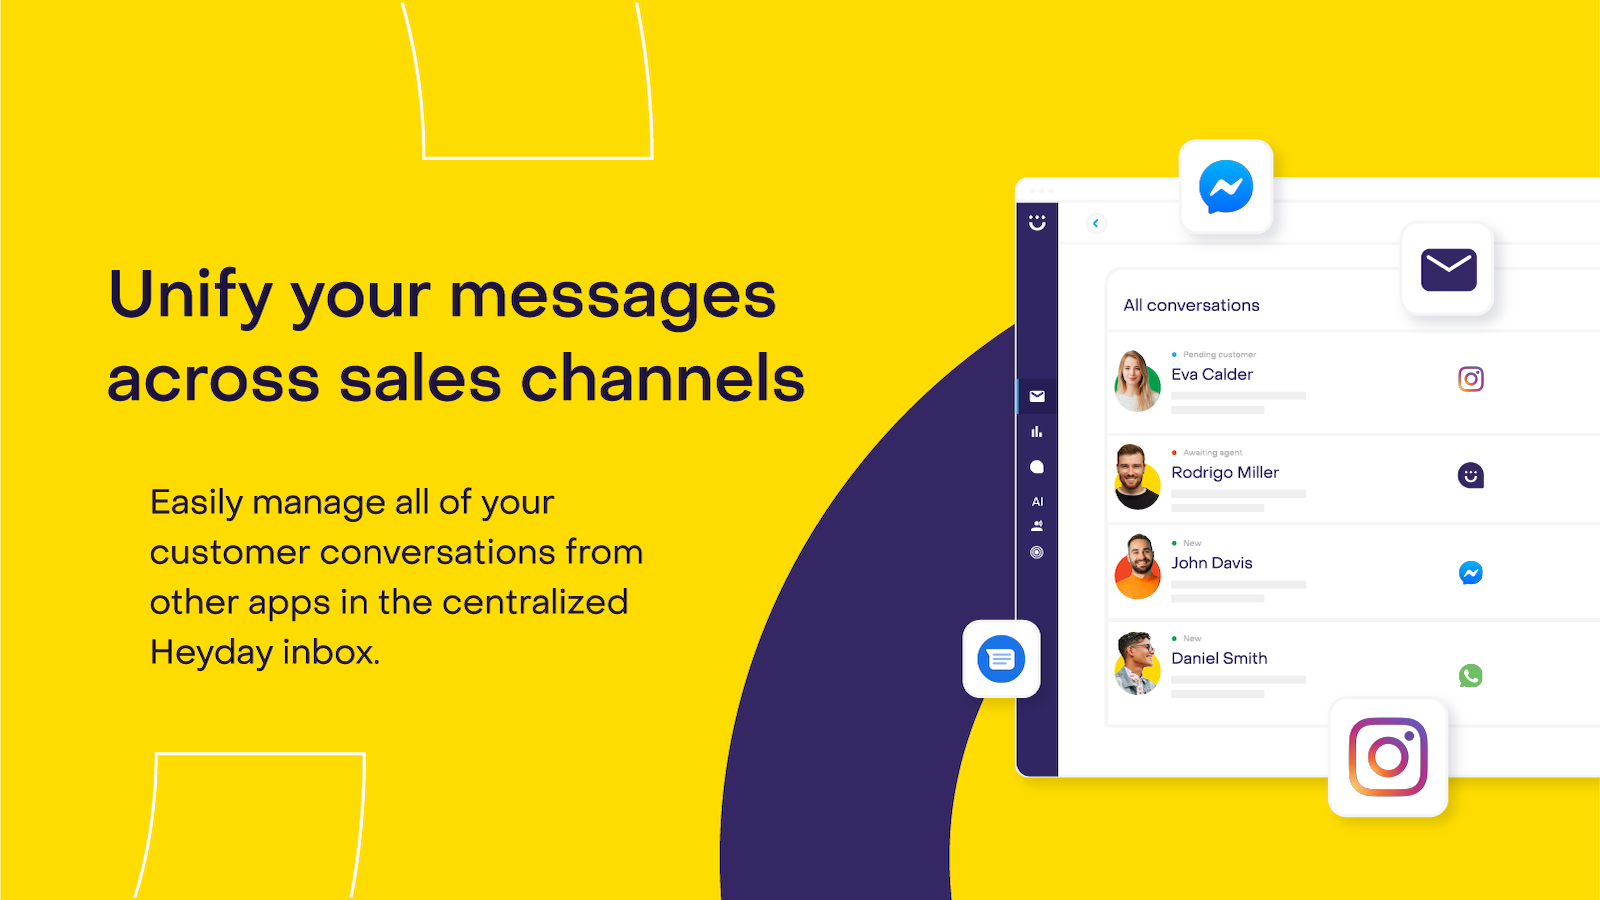 A centralized inbox for all customer messages.